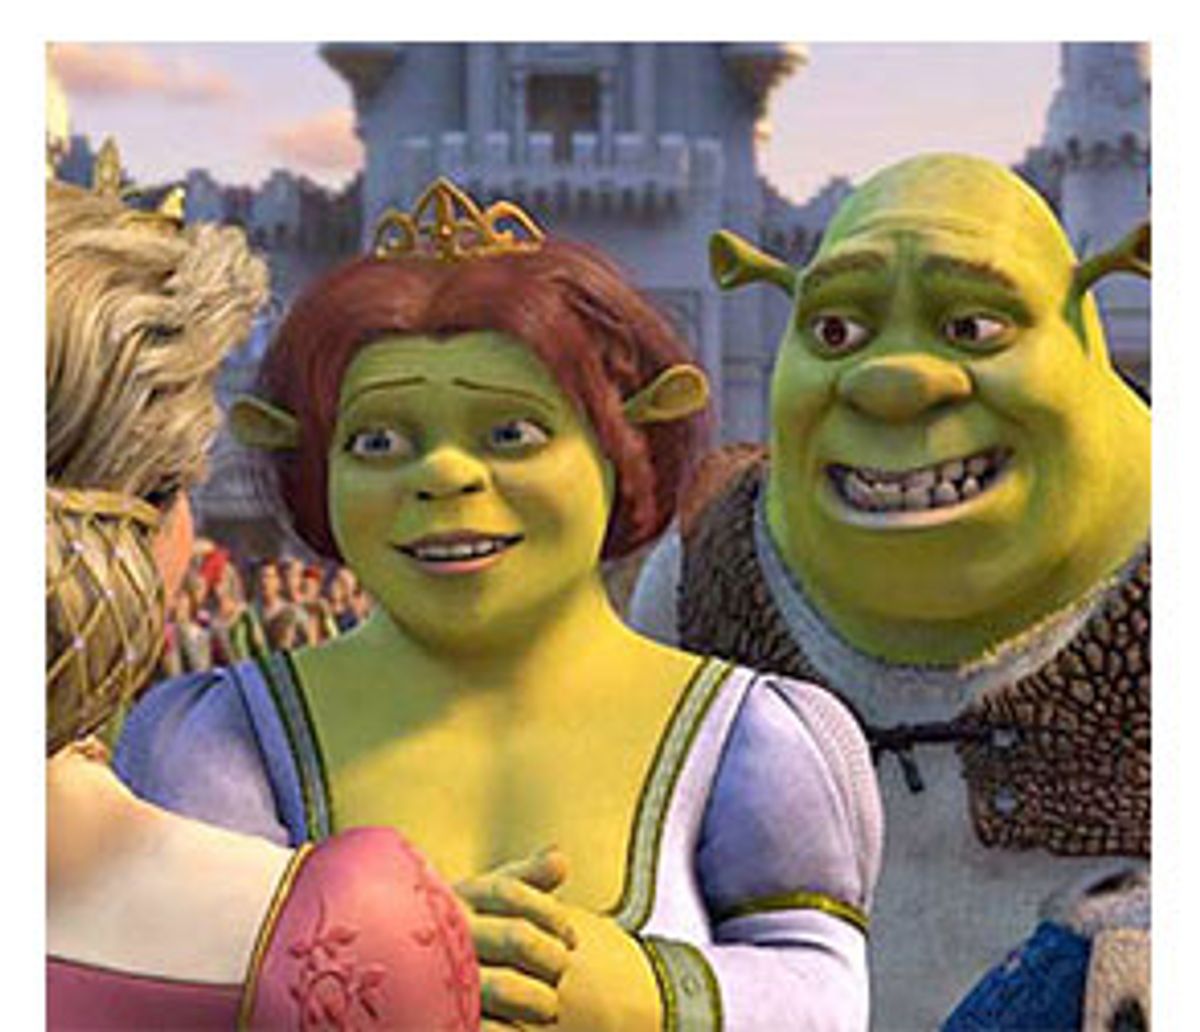 Shrek 2 but only when ANYONE says E 